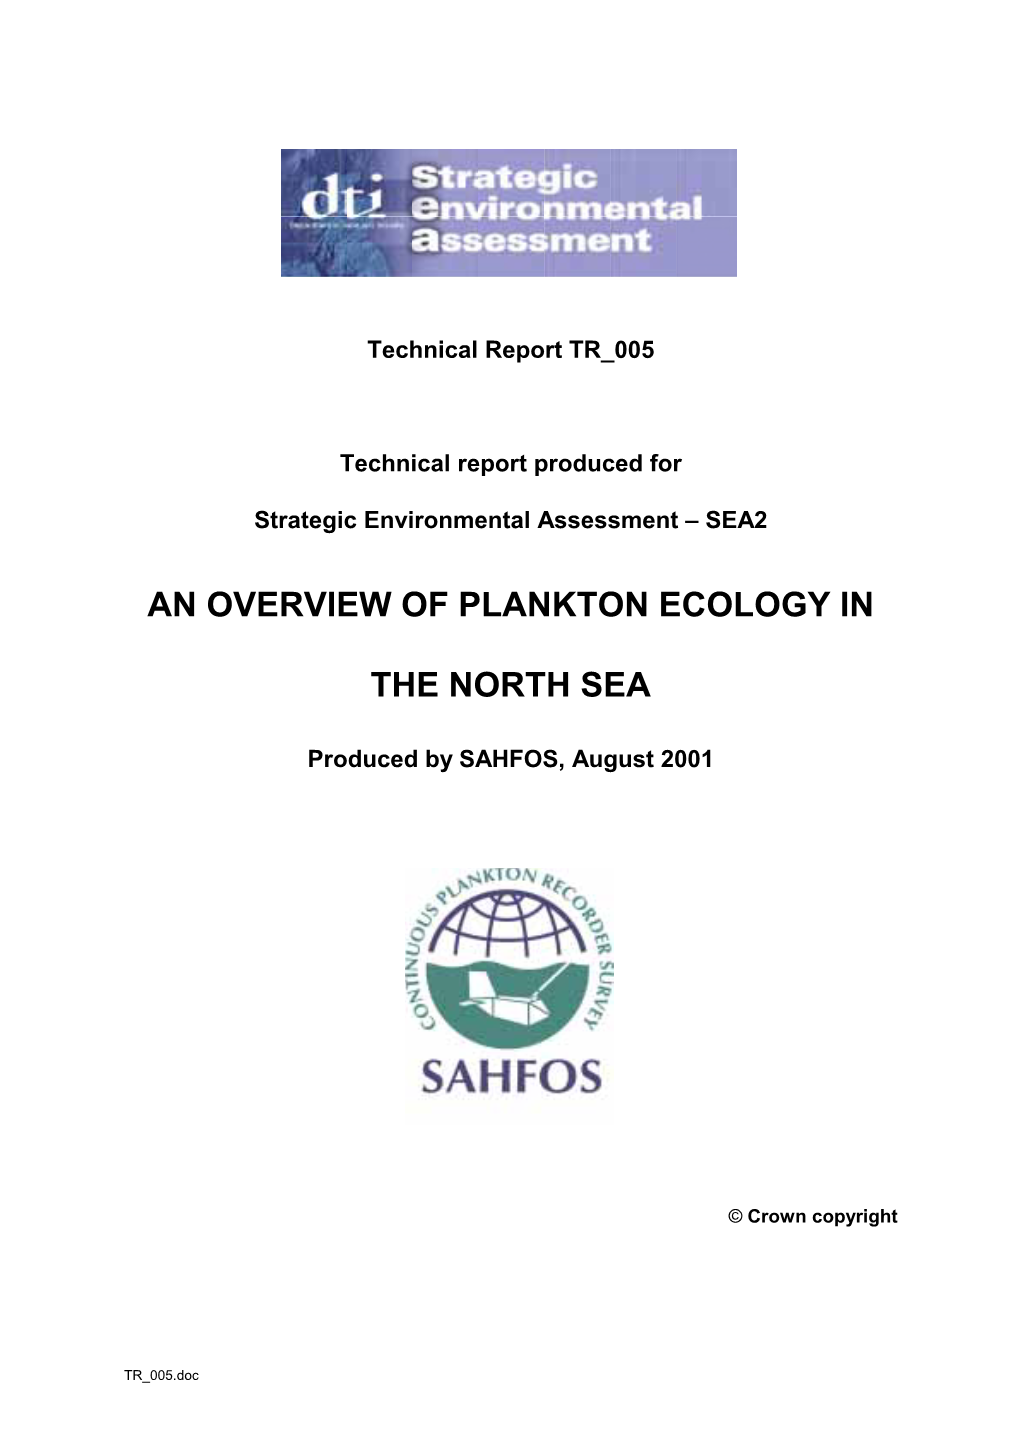 An Overview of Plankton Ecology in the North Sea